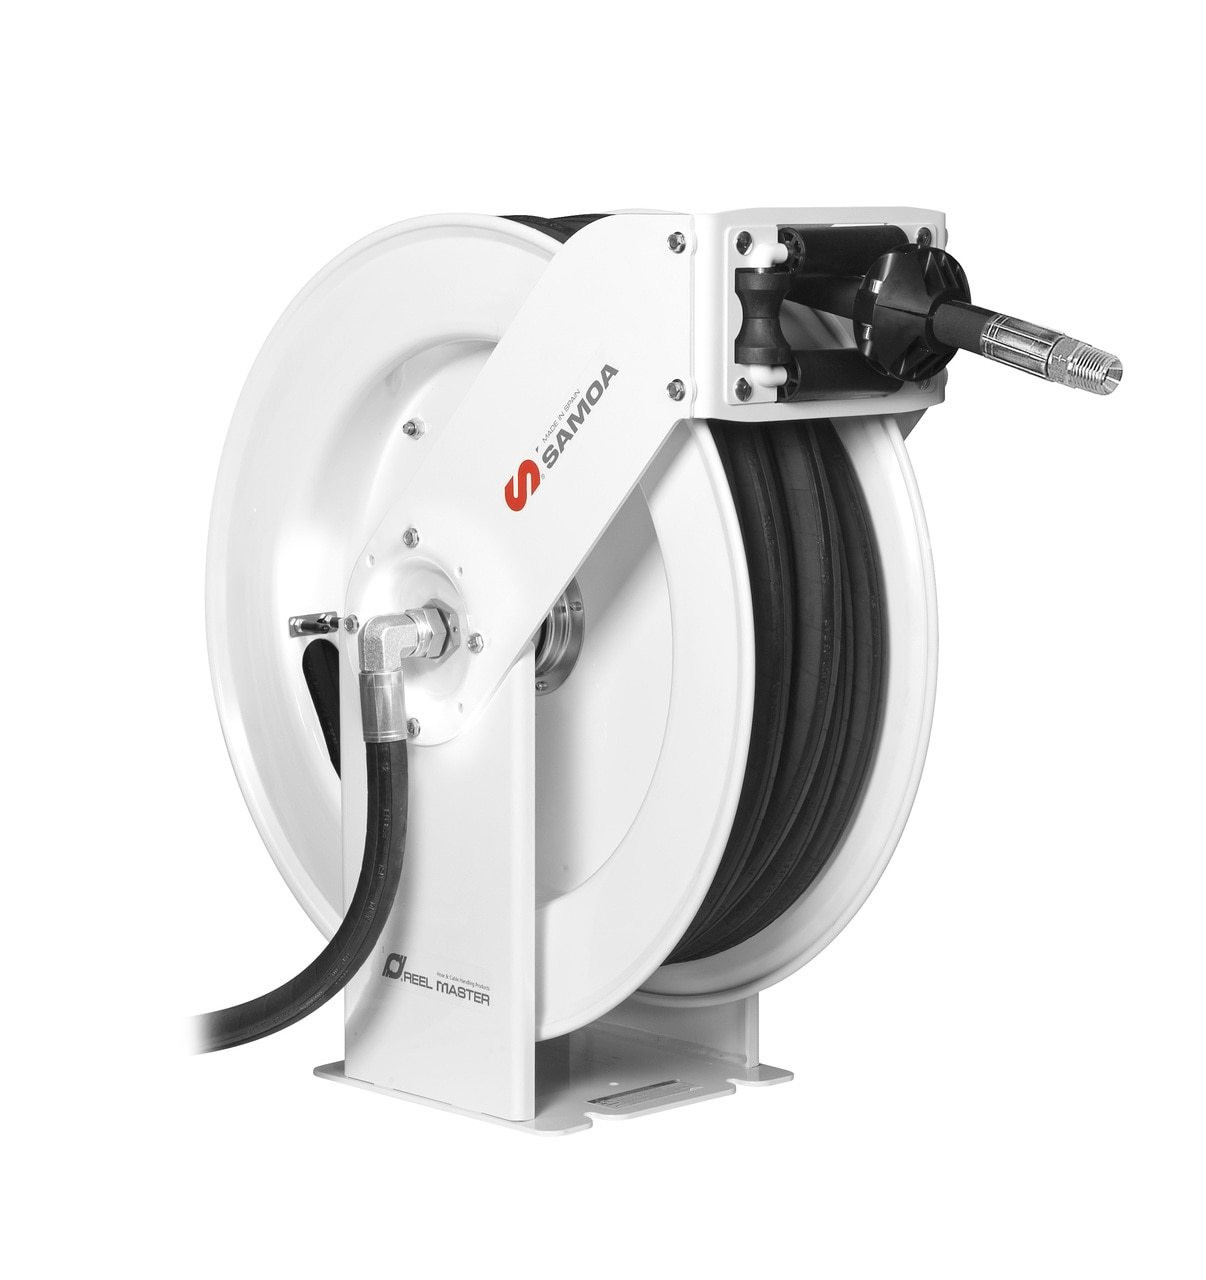 SAMOA RM34 Heavy-Duty Hose Reel for Air/Water/Antifreeze Solutions